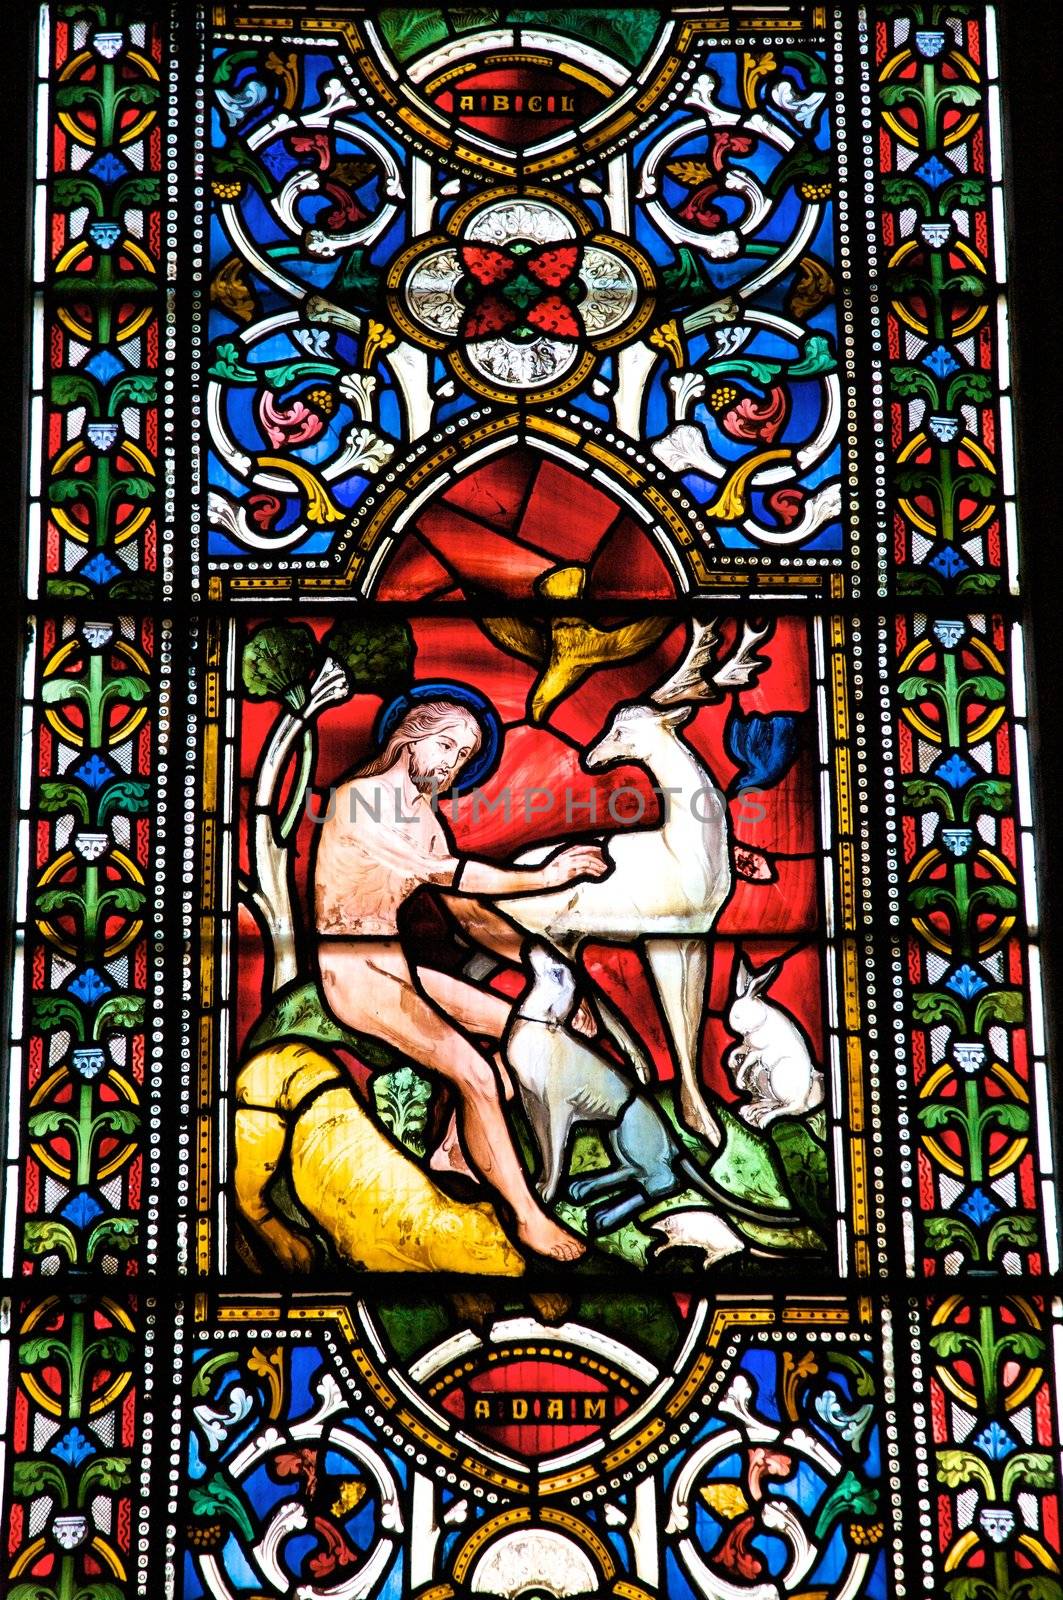 nude christ on a glasswork by quintanilla